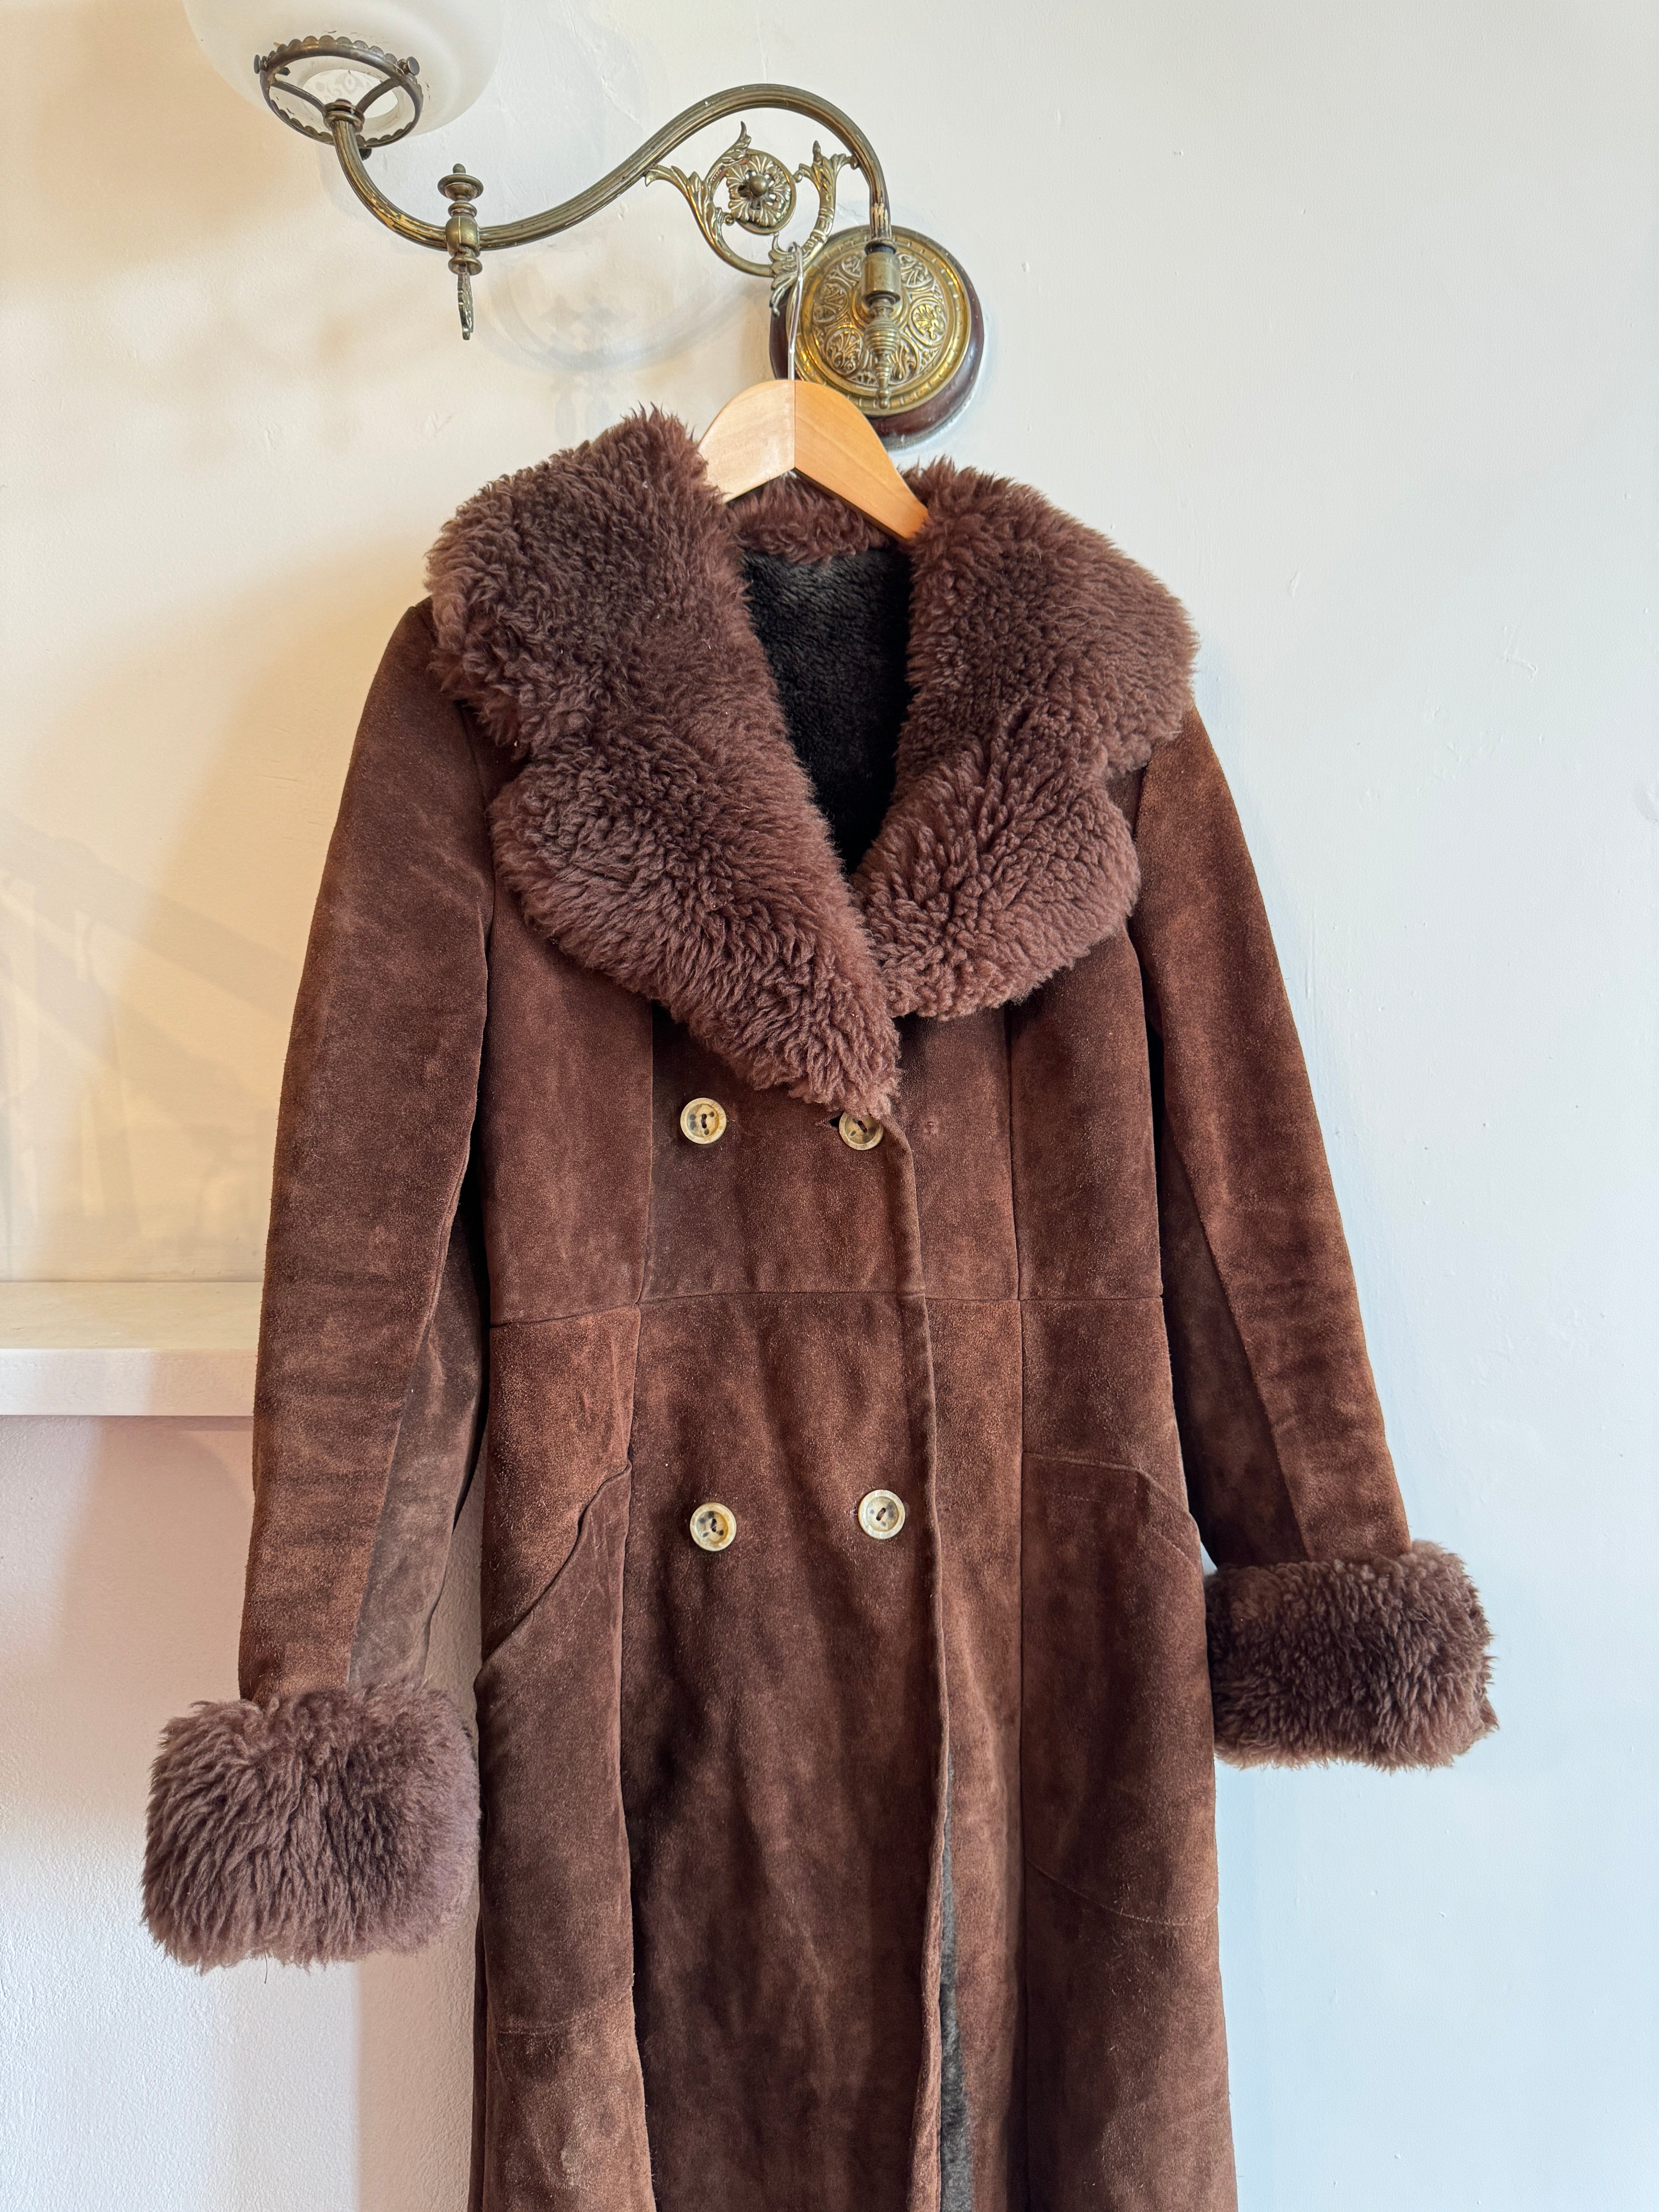 Vintage Suede Leather and Shearling Coat Chocolate Brown